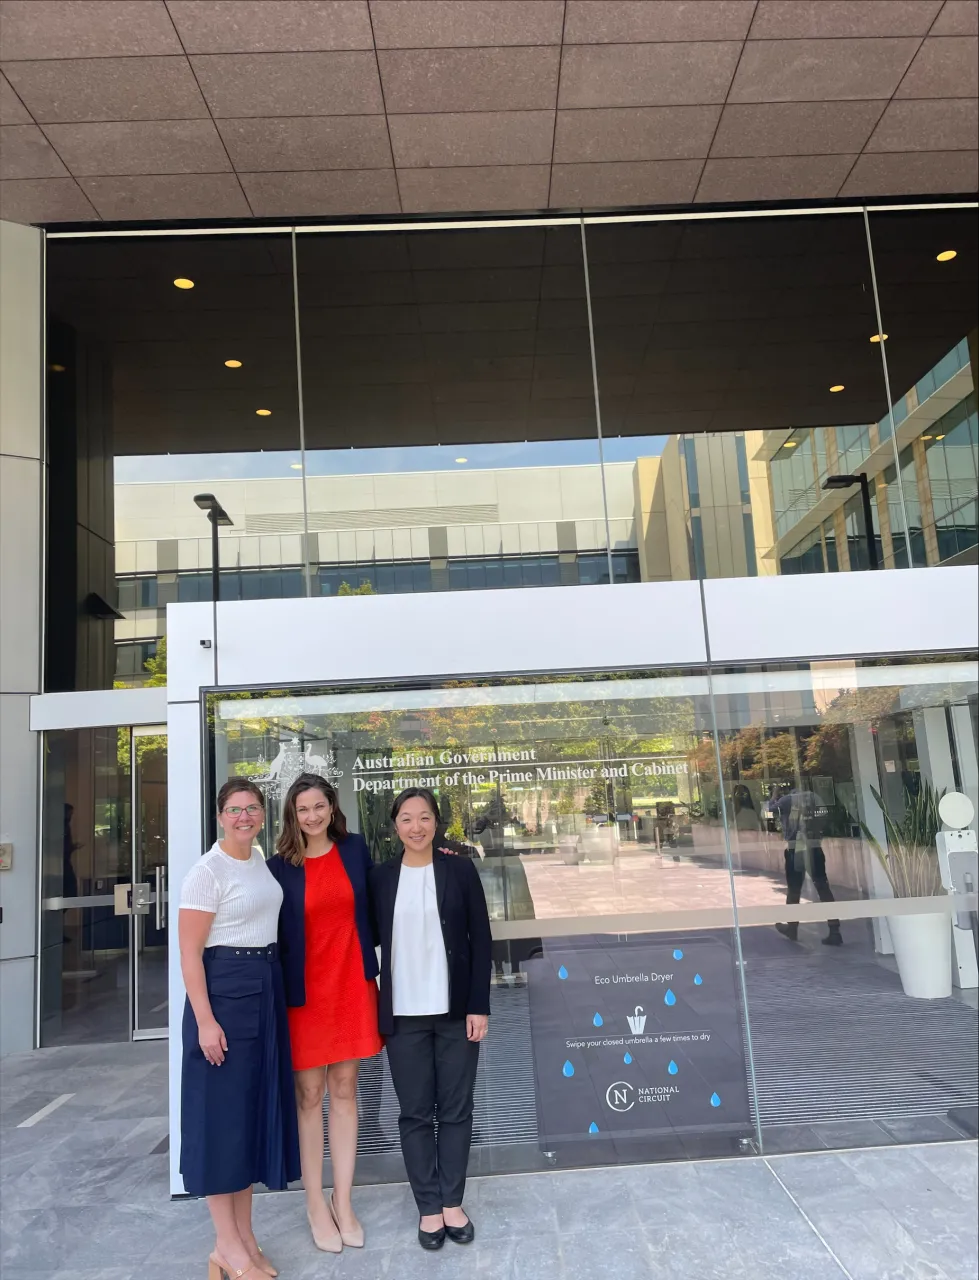 Image: DHS Principal Director Kristen Best and delegation in front of the Australia Department of the Prime Minister and Cabinet in Canberra, Australia